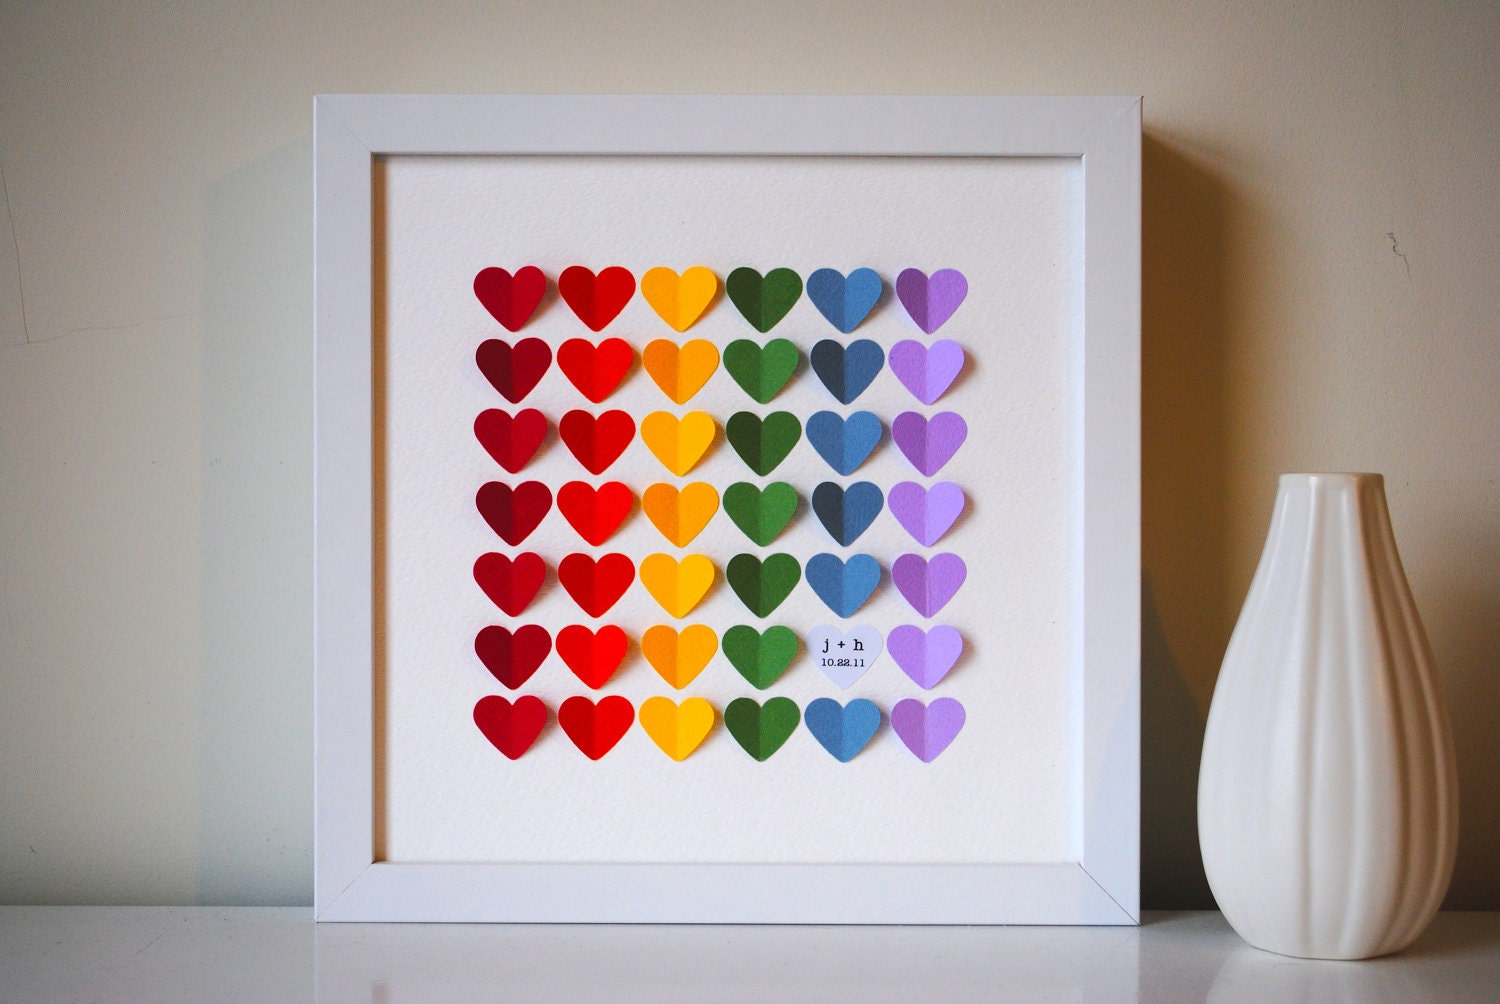 Wedding guest book alternative - 3D Wedding Hearts - RAINBOW - SMALL guest book (includes frame, instruction card and one pen)